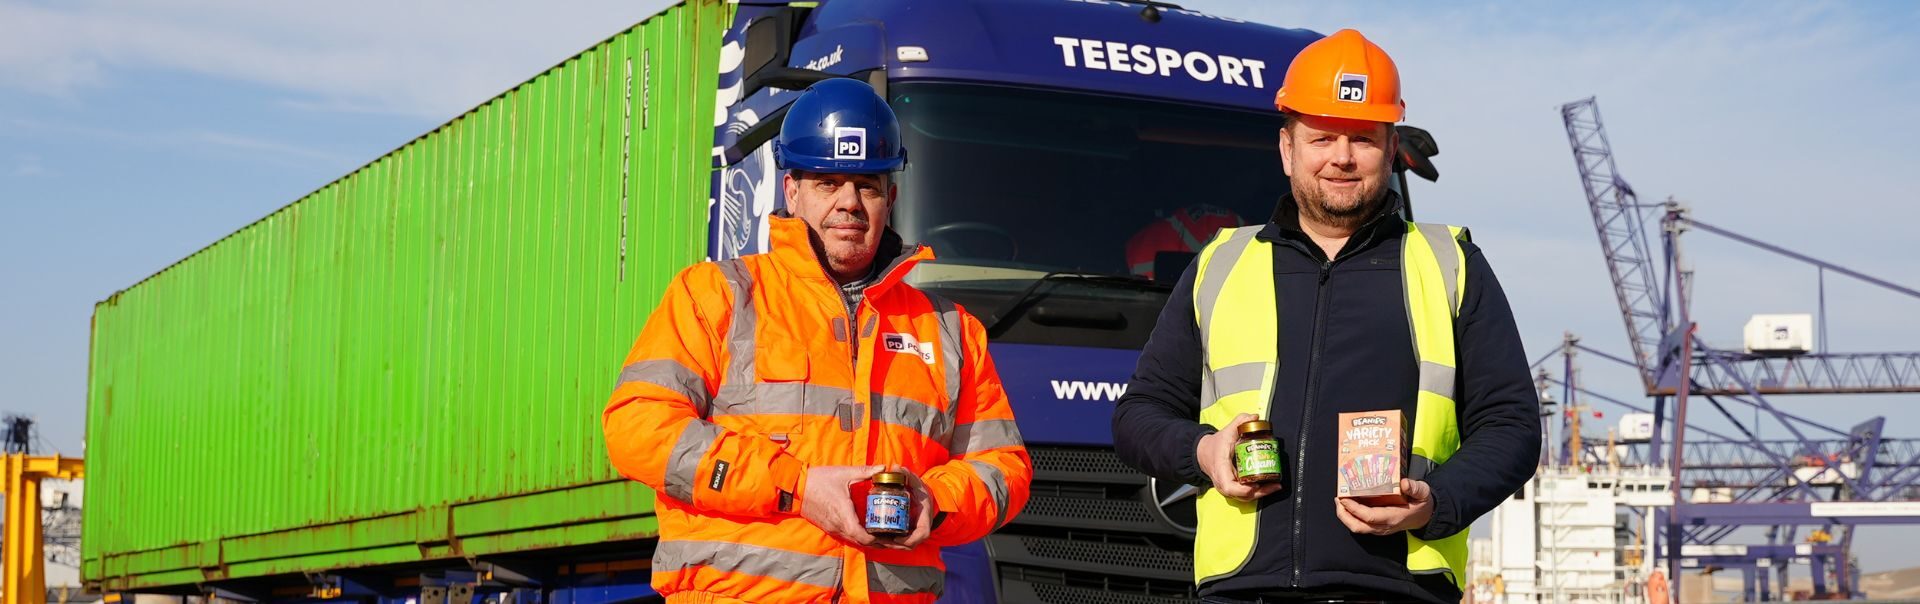 PD Ports continues to support local businesses with welcoming of first shipment for Beanies Coffee through Teesport